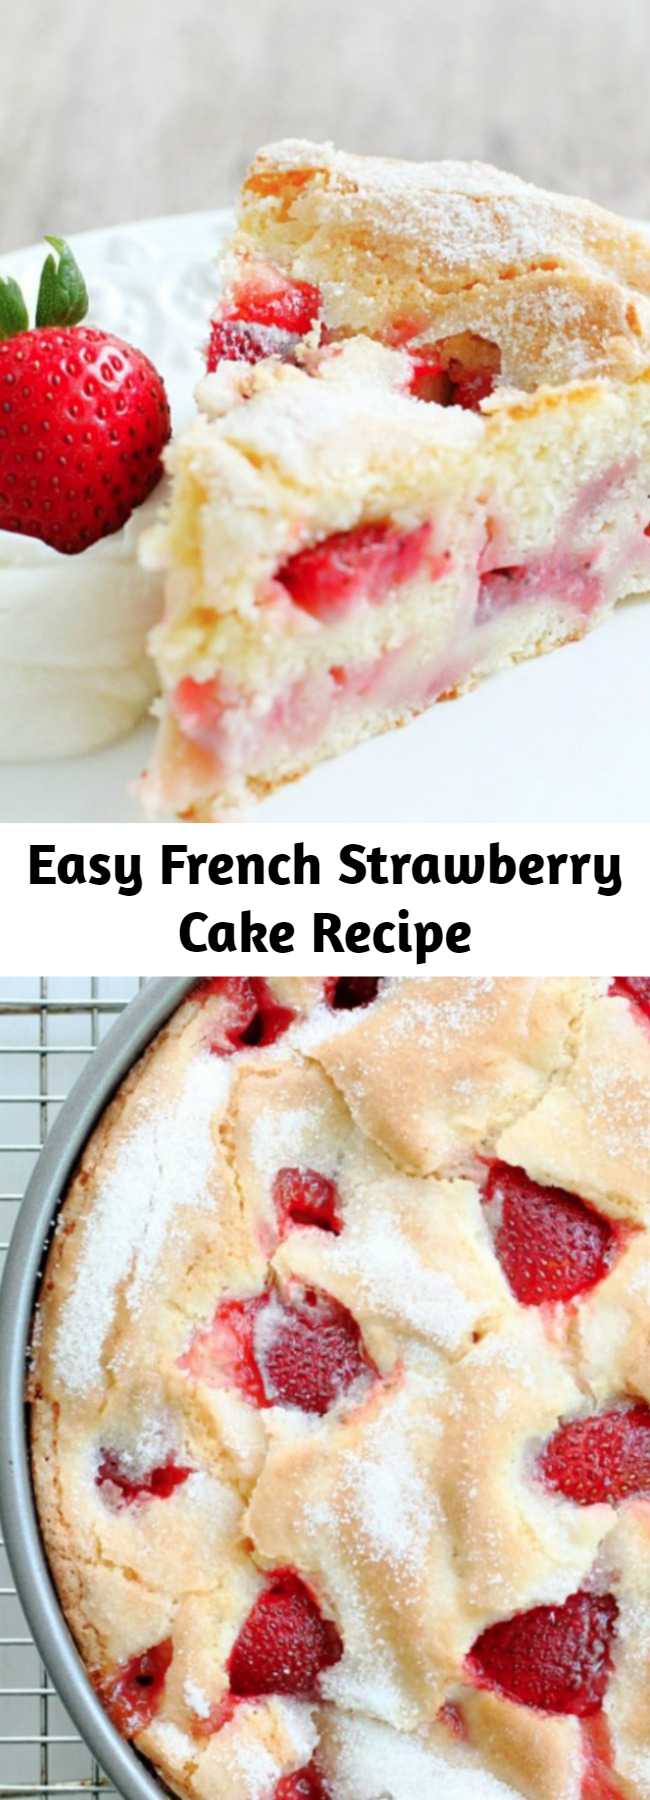 Easy French Strawberry Cake Recipe - French Strawberry Cake makes a stunning presentation straight out of the pan it is baked in - plus it is mixed together in just one bowl. An easy and impressive cake for strawberry season.